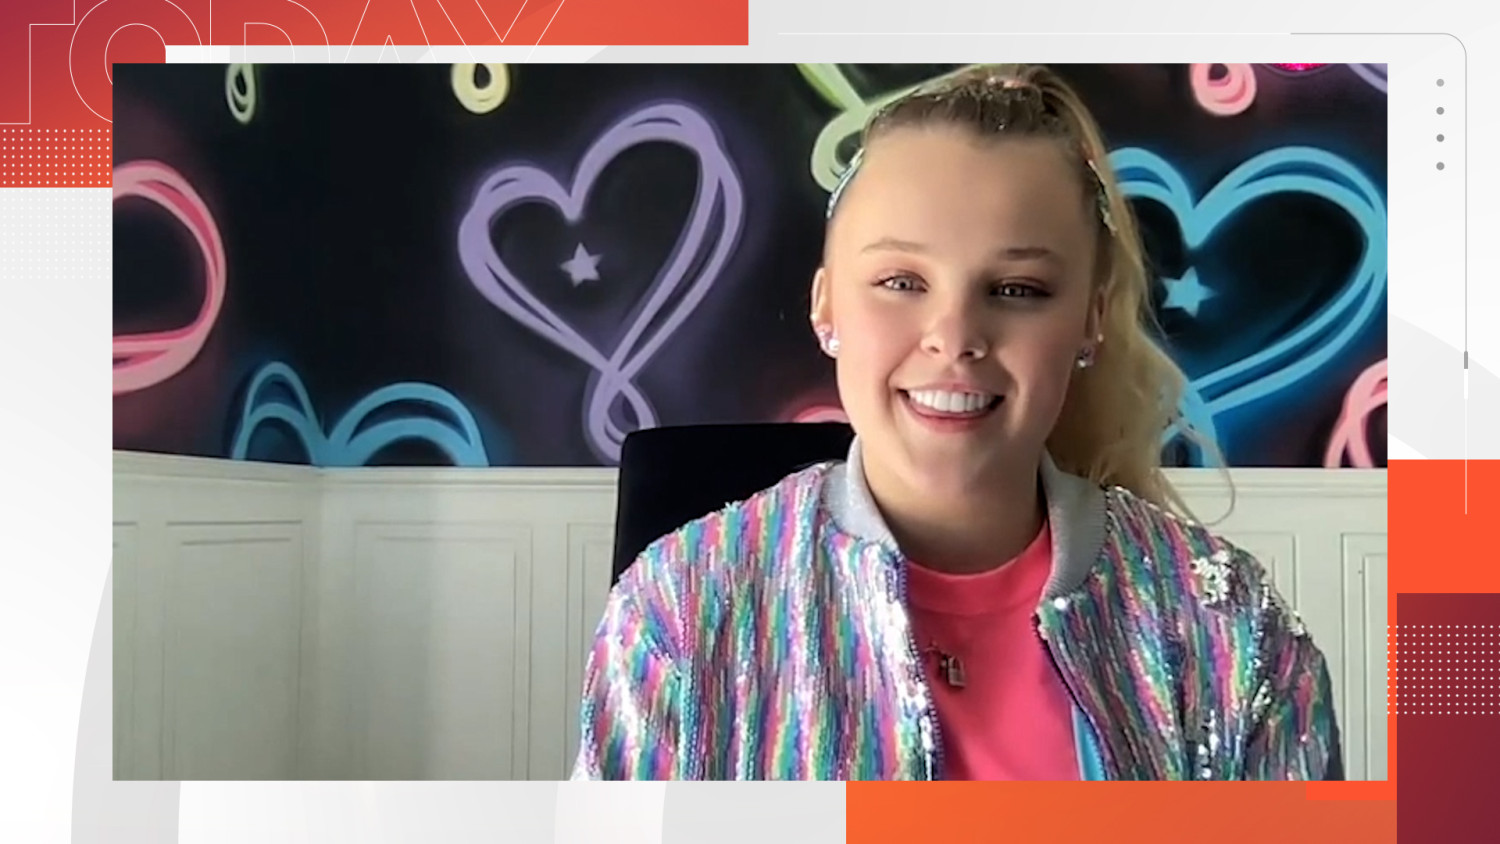 JoJo Siwa shares greatest misconception about her — and how she